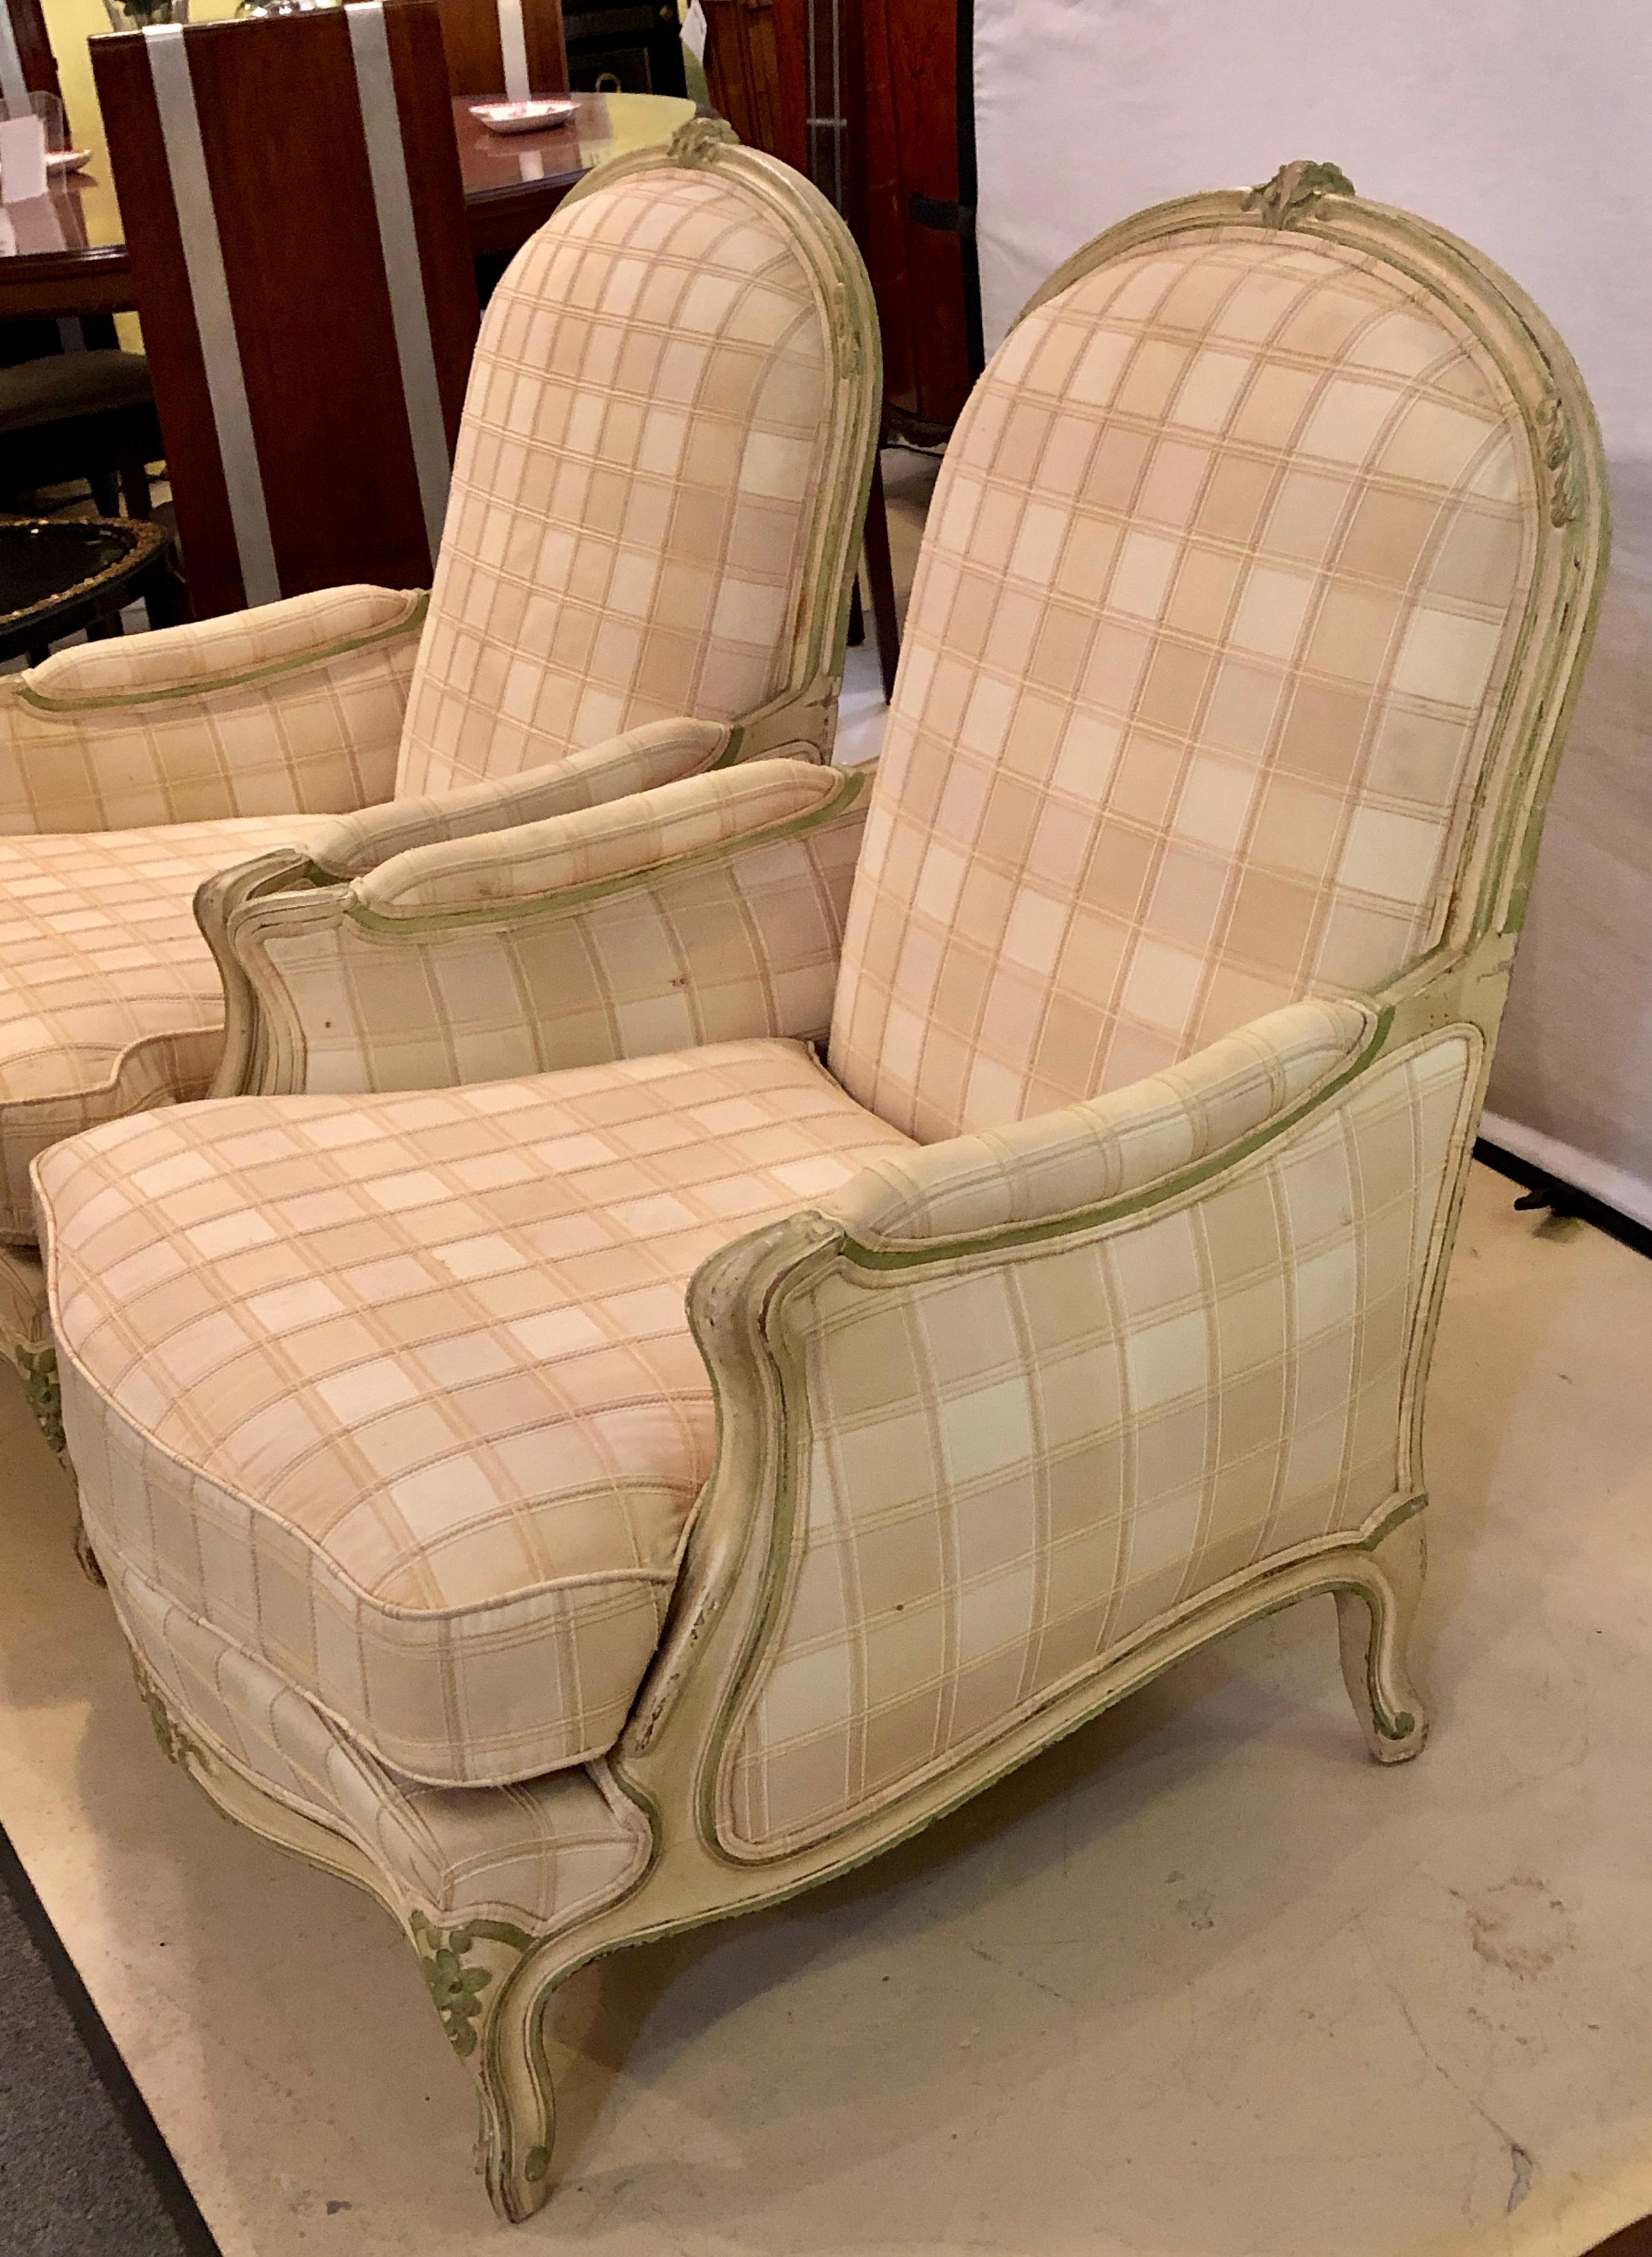 Pair of paint decorated Louis XV style bergeres chairs each having a plaid fabric with extra wide seat and back rests. These very comfortable and sturdy chairs would glow in any setting.